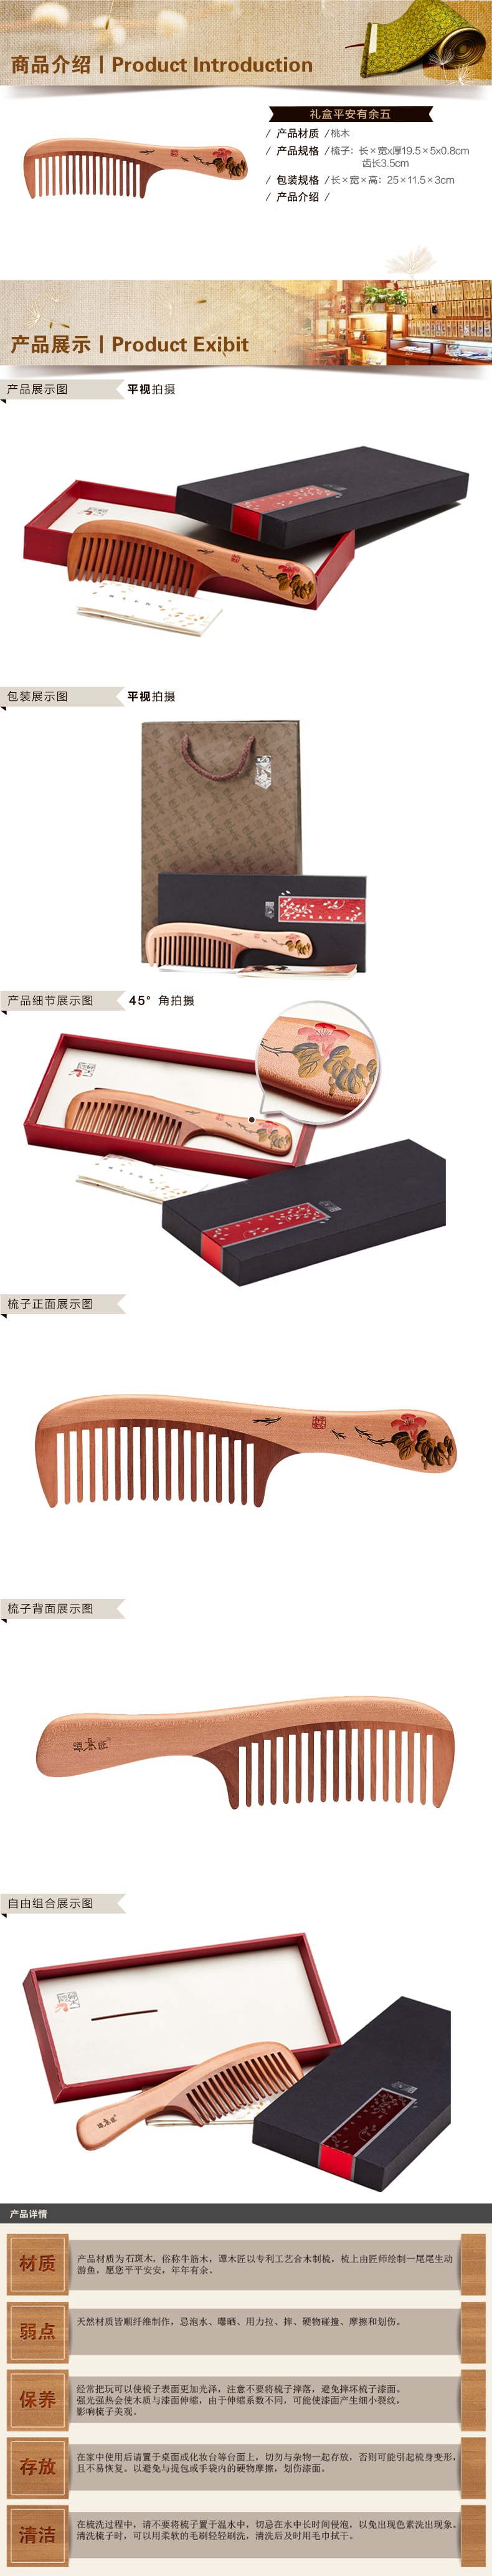 TAN MUJIANG Hair Comb for Curly Hair - Wide Tooth Wood Comb - Big Size No Static Natural Wooden Detangling Comb for Wome